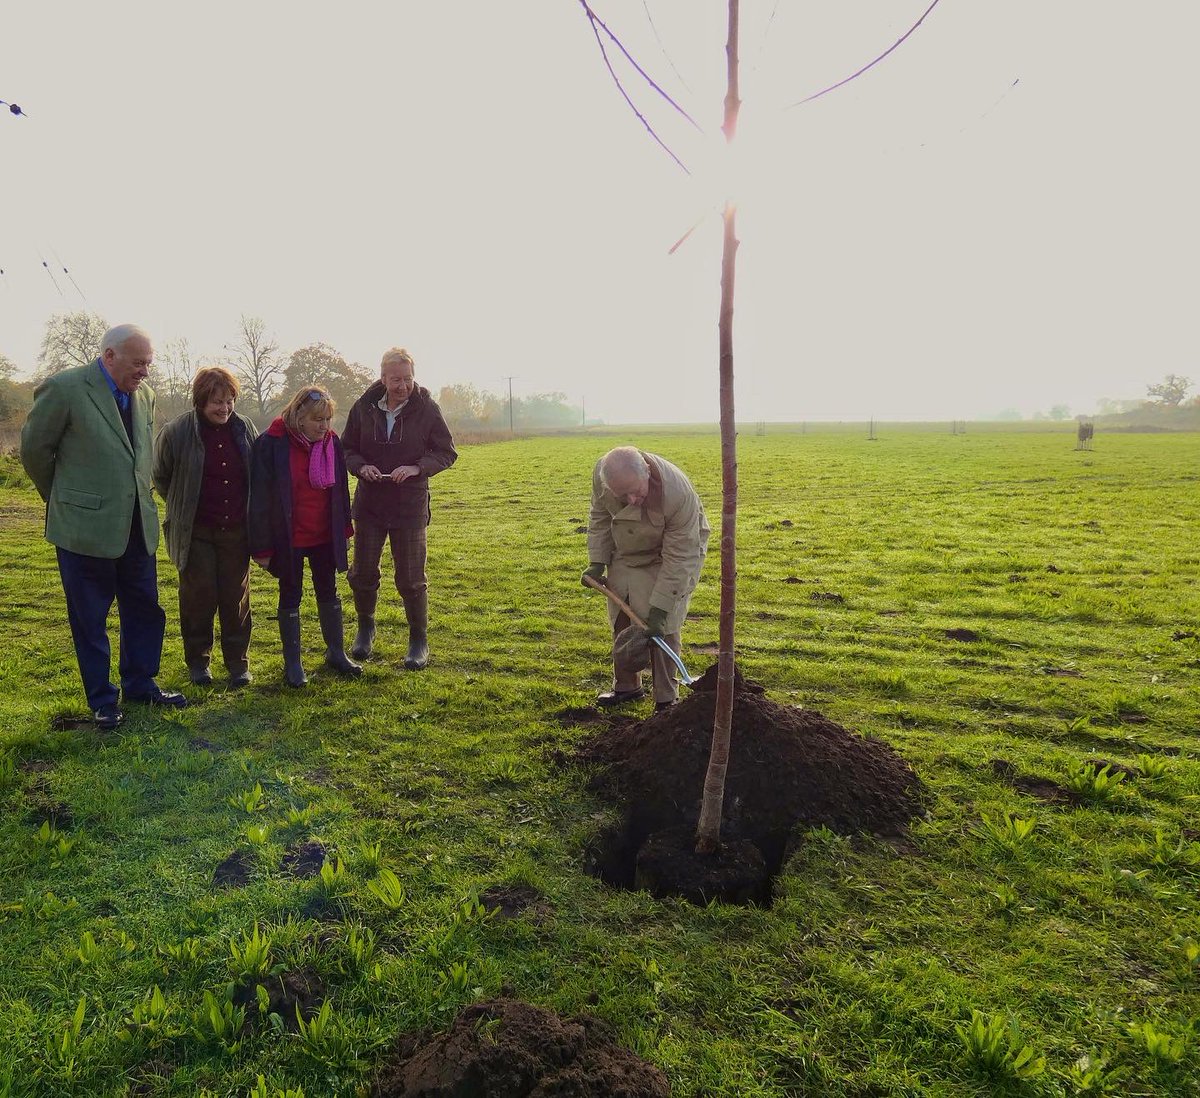 In late November, His Majesty The King was accompanied by the Lord Lieutenants of Cambridgeshire, Lincolnshire, Norfolk and Suffolk to plant the 100th sapling creating a new area of woodland pasture on the Estate for @queensgreencanopy